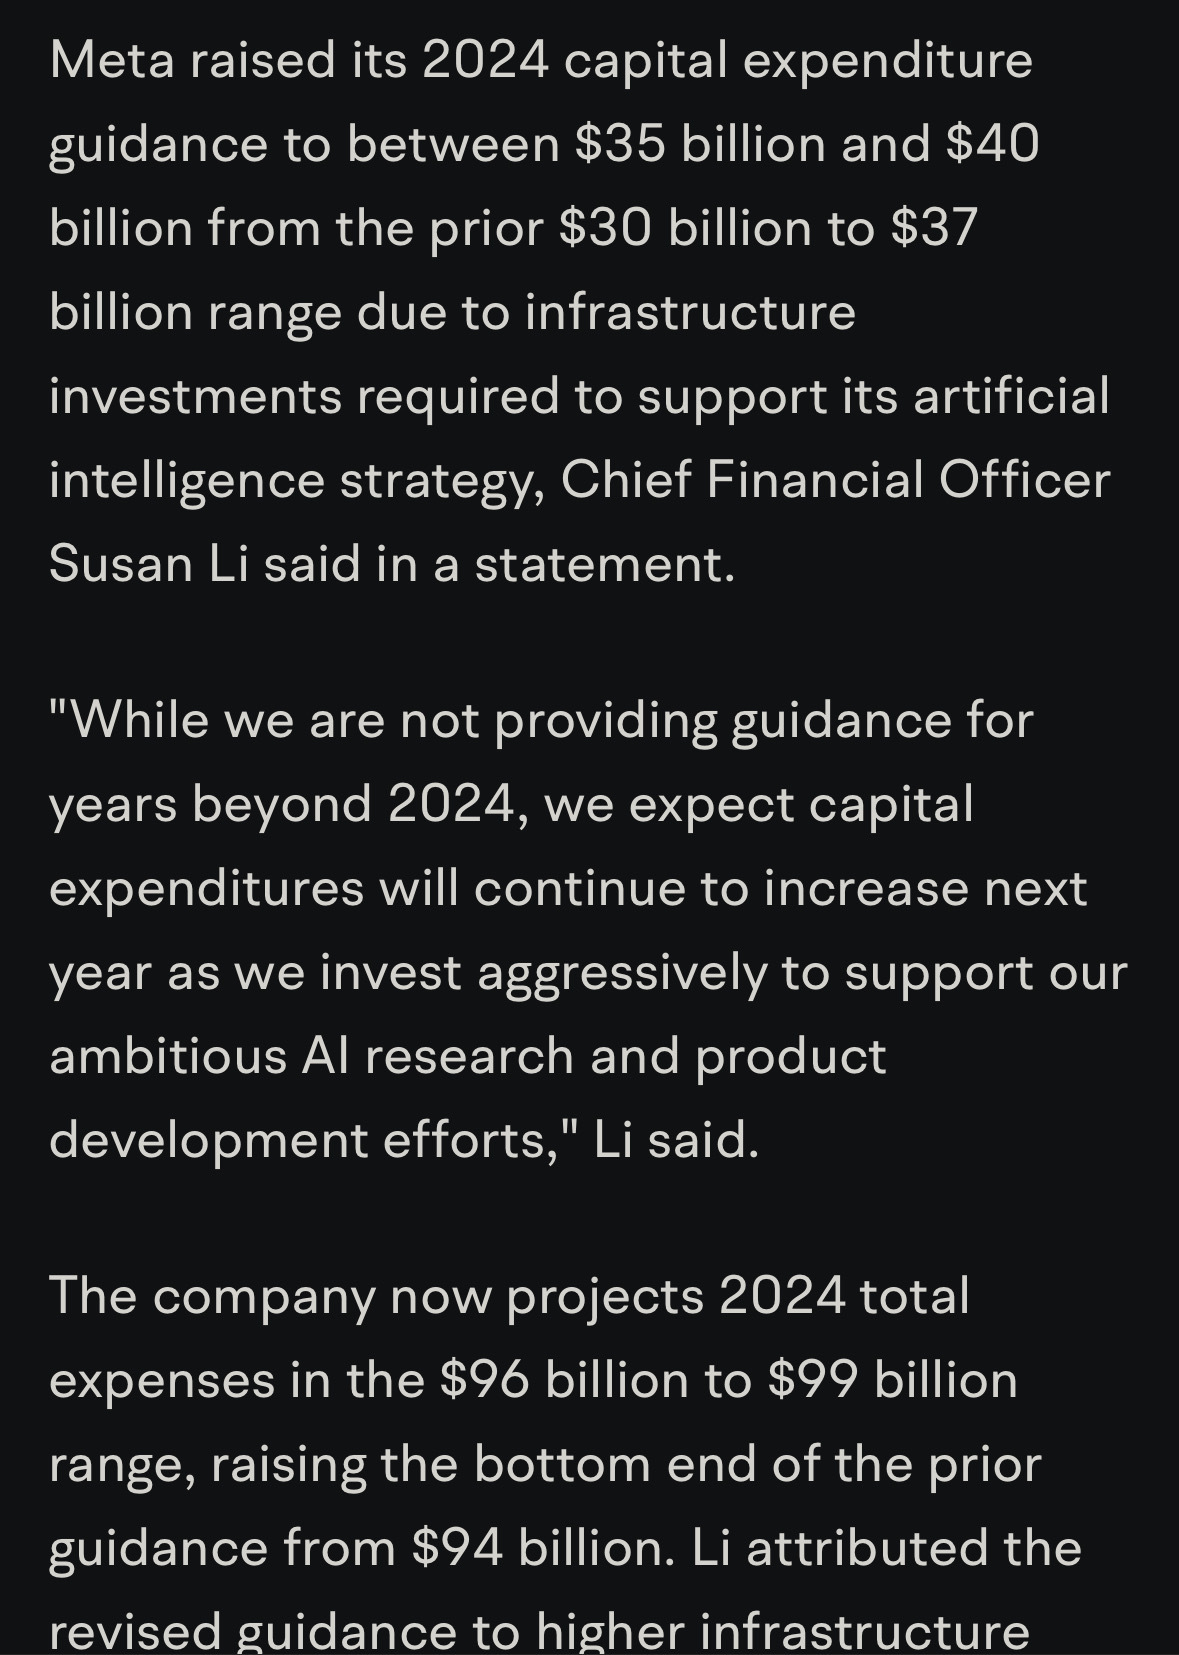 $Meta Platforms (META.US)$ So the missing amounts from Q2 are going back into the company for more AI research and product developement. shouldn’t that be a goo...